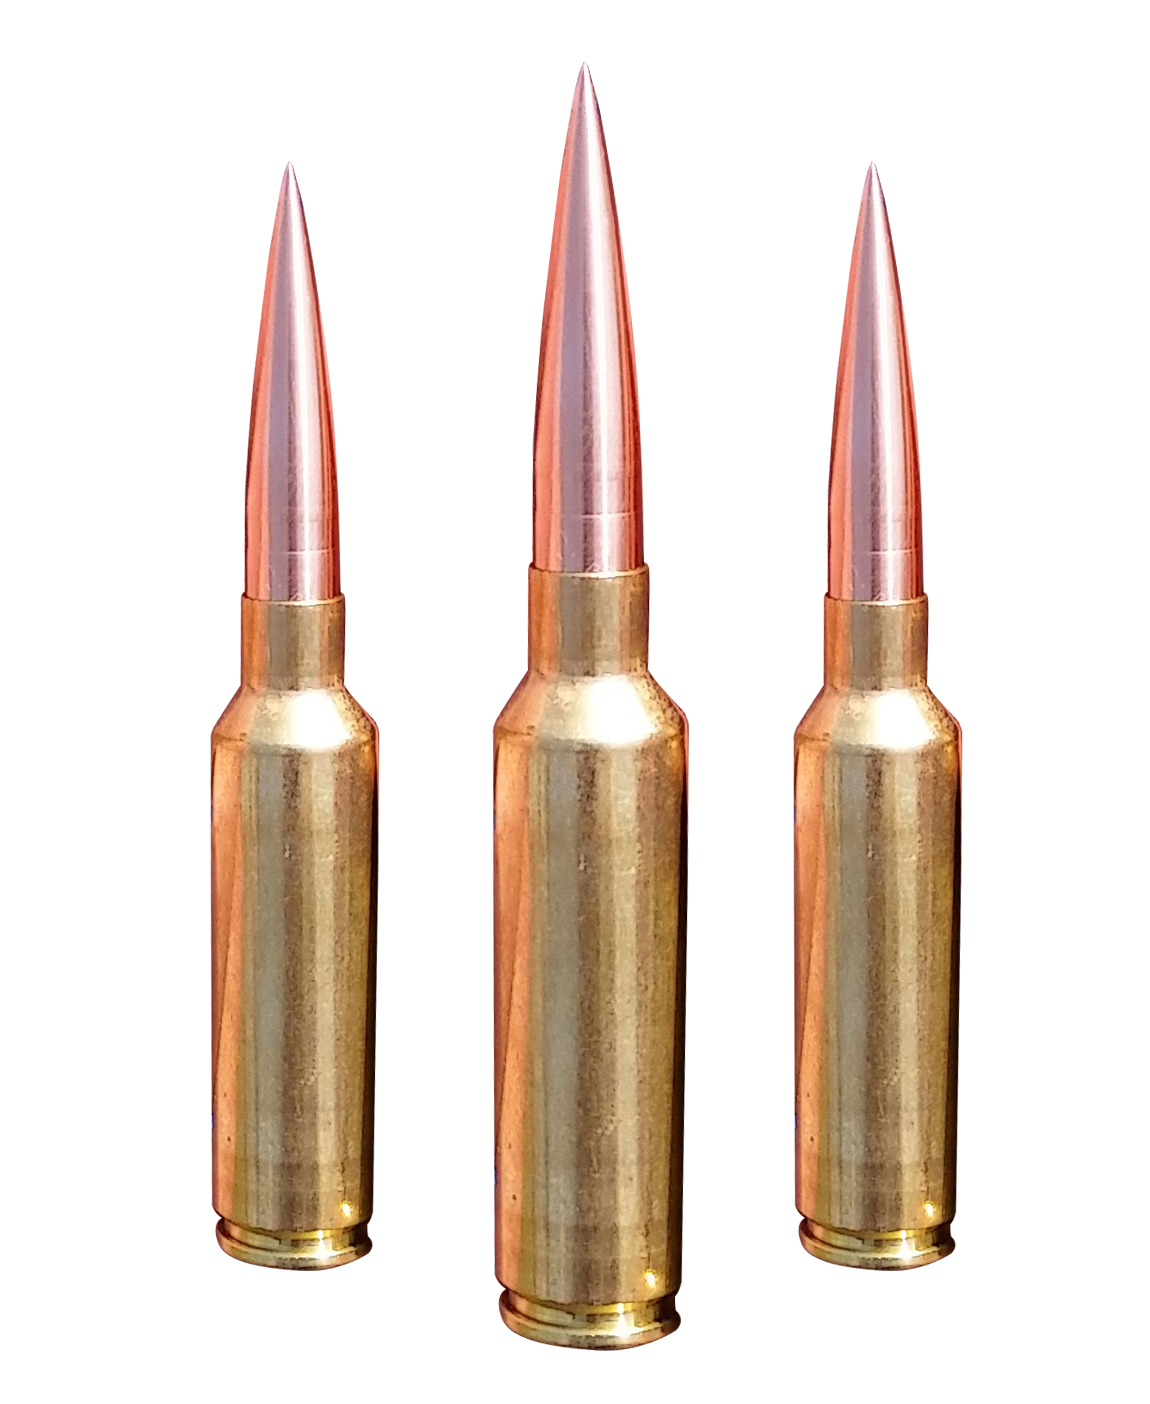 A Group Of Bullets With Pointed Tip